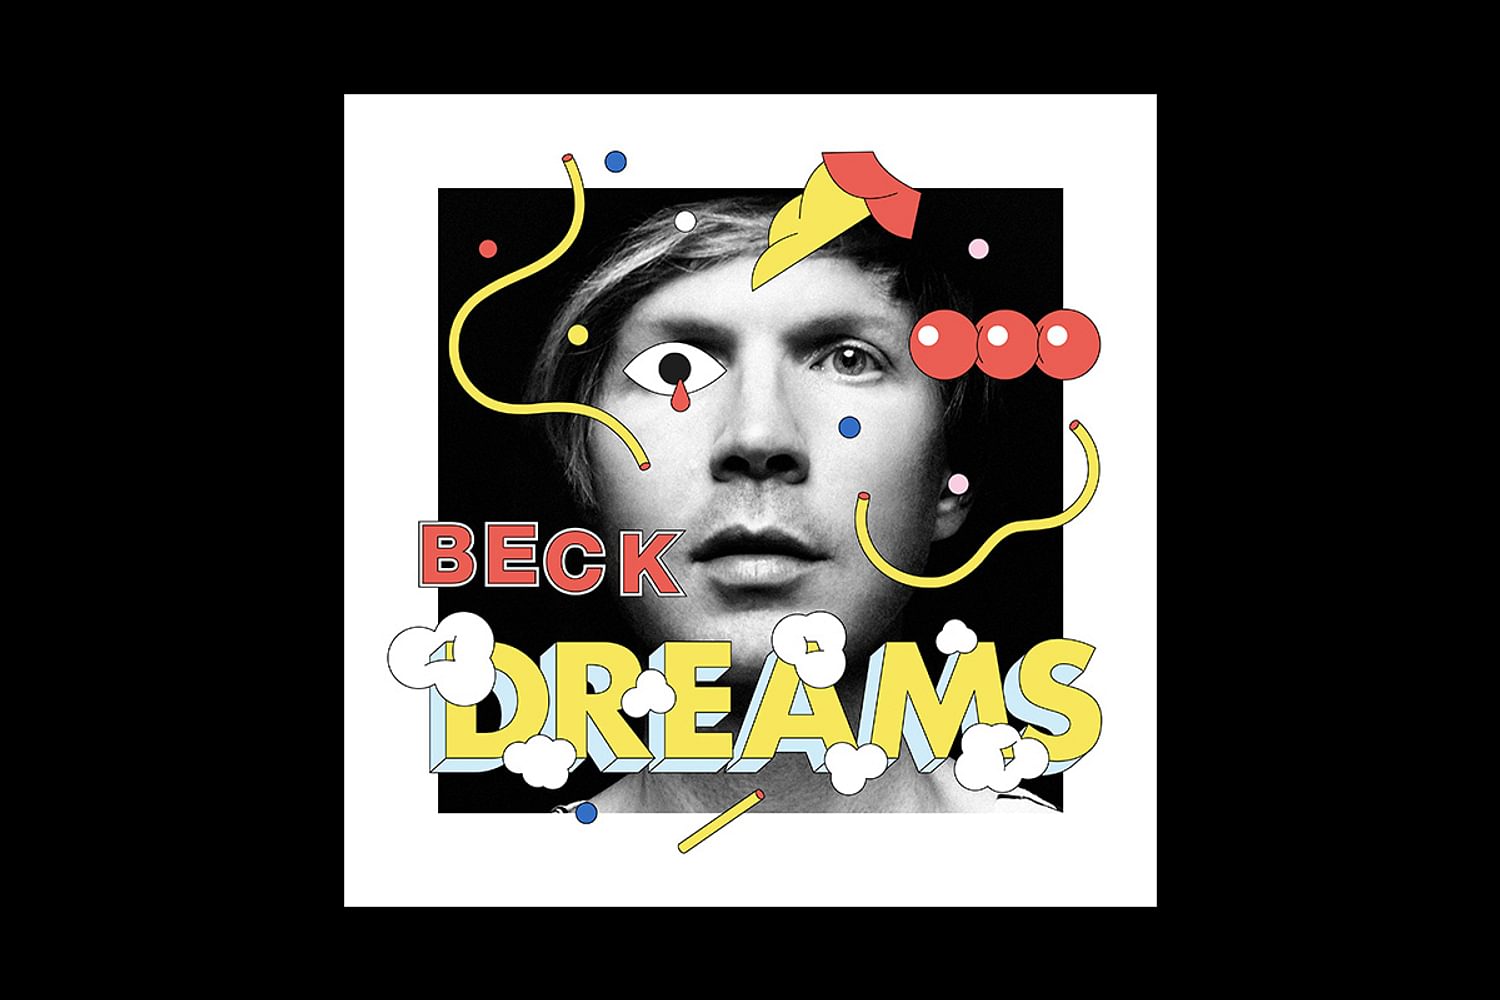 Beck is back, and this time he’s bringing his (hopefully weird) ‘Dreams’